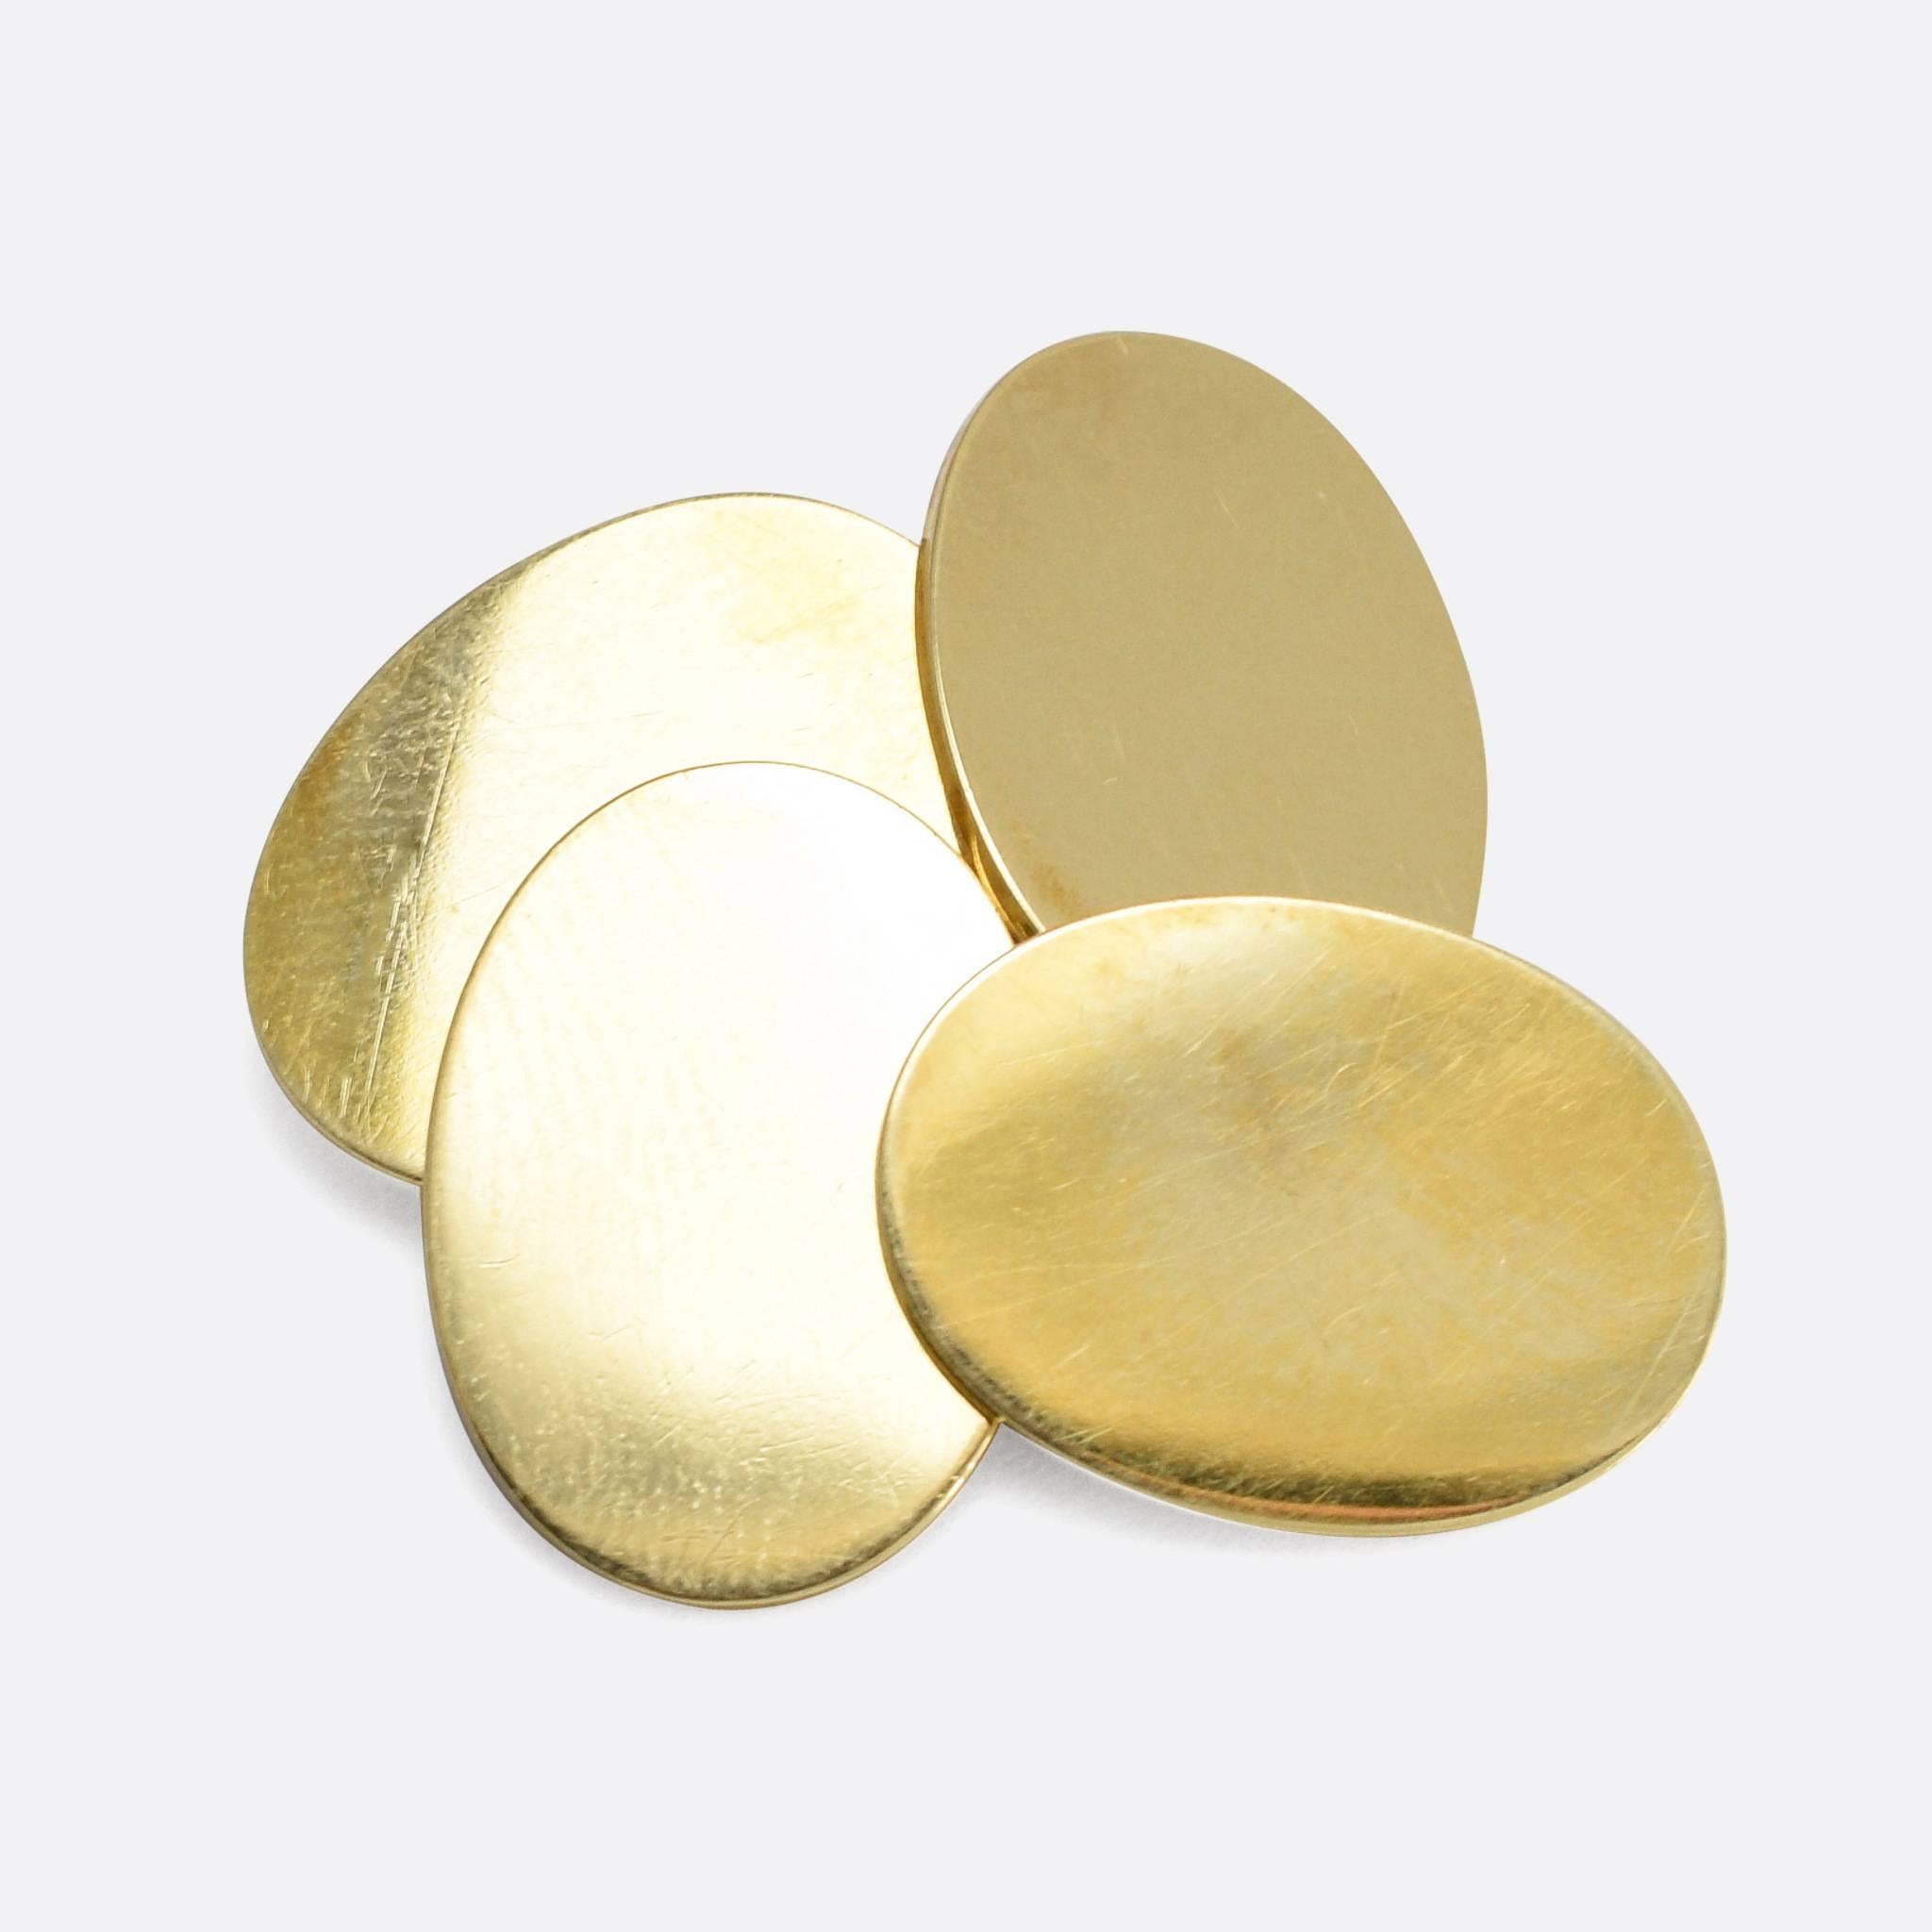 A fine quality pair of gents cuff links, modelled in solid 15k yellow gold. The classic oval shape is elegant and understated - while the quality is evident at first glance. English hallmarks for 15ct gold, Birmingham 1923.